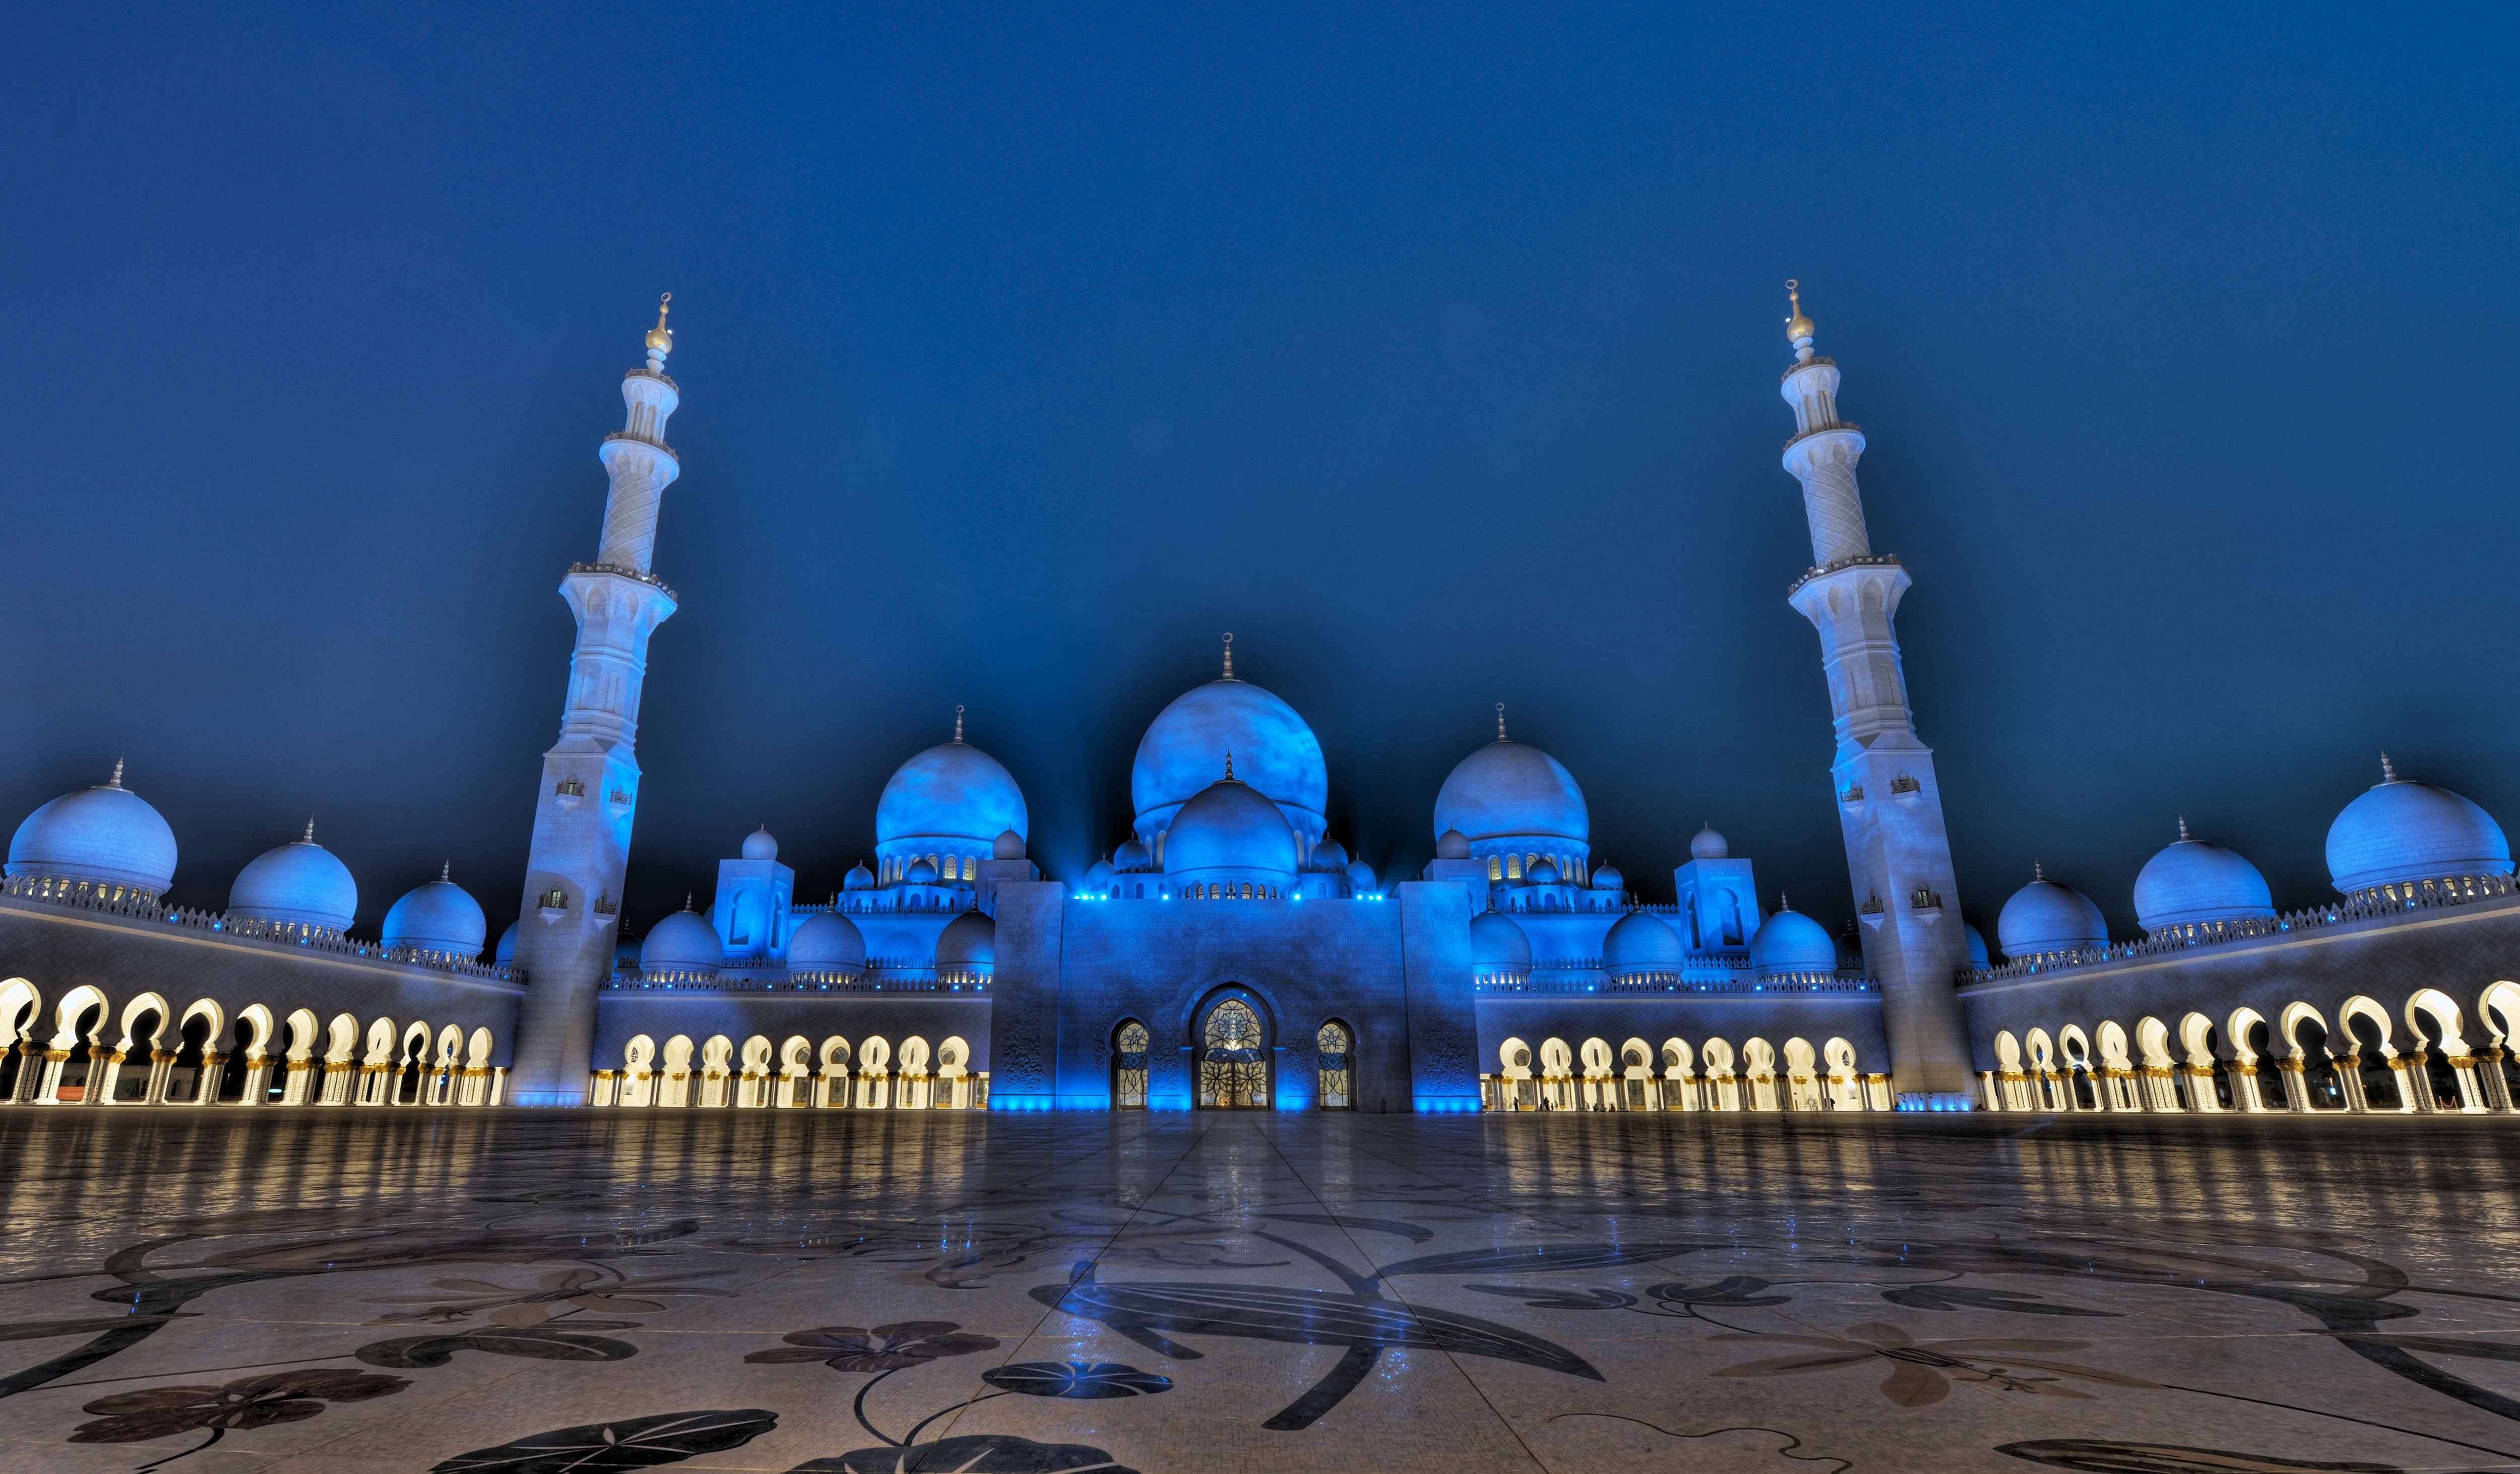 3. The mosque's lighting system is connected to the lunar cycle